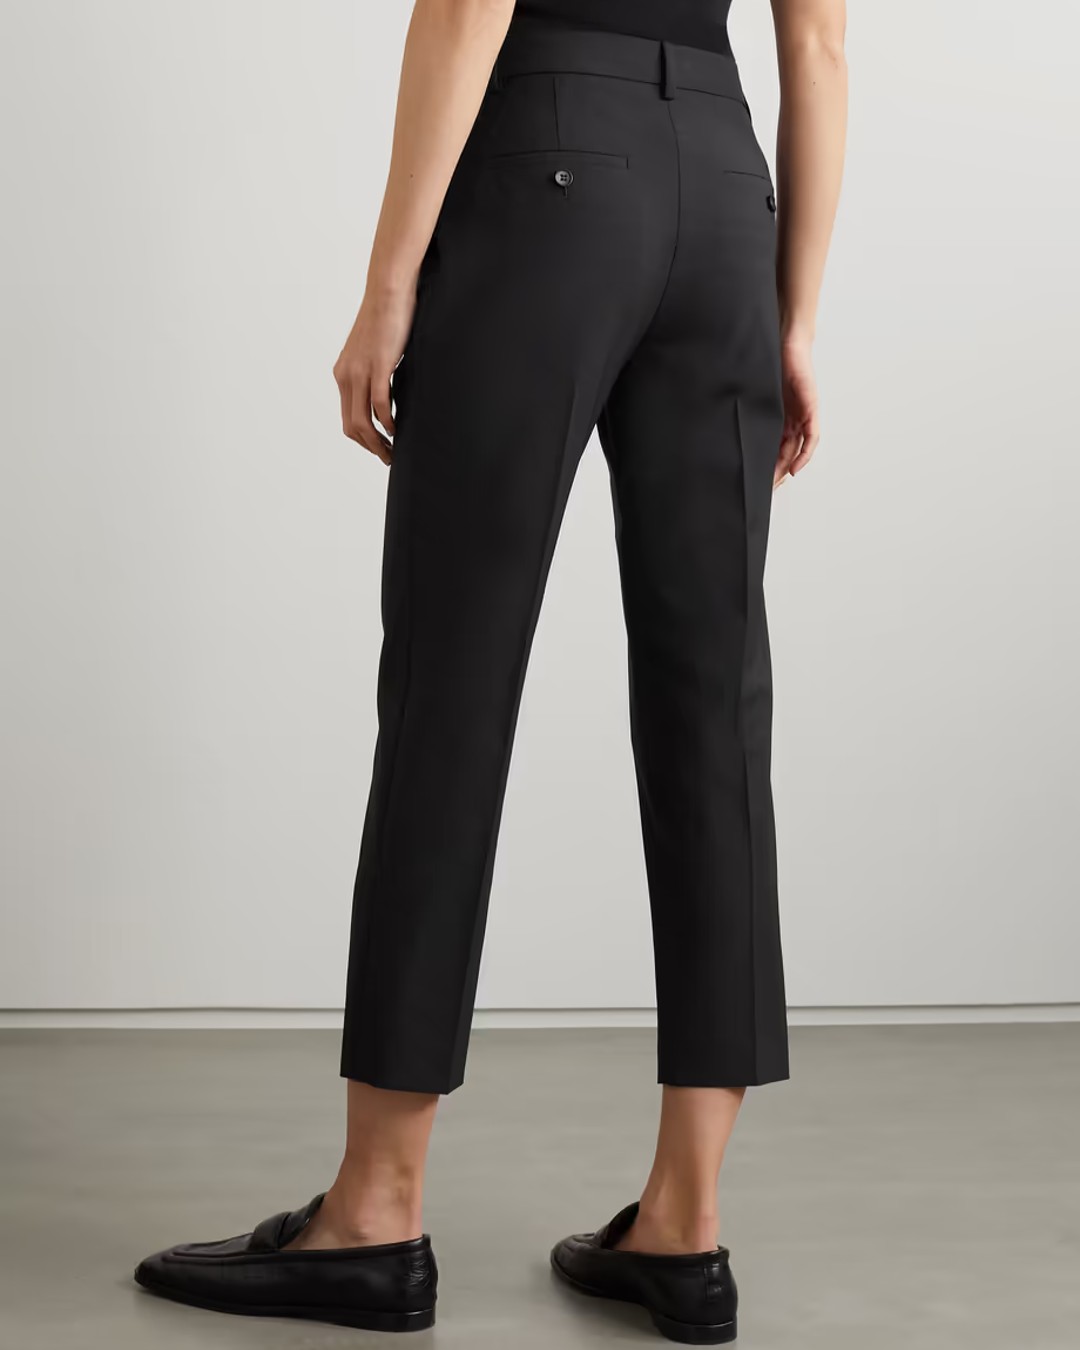 13 Best Black Work Pants for Women in 2023 According to Editors and Reviews